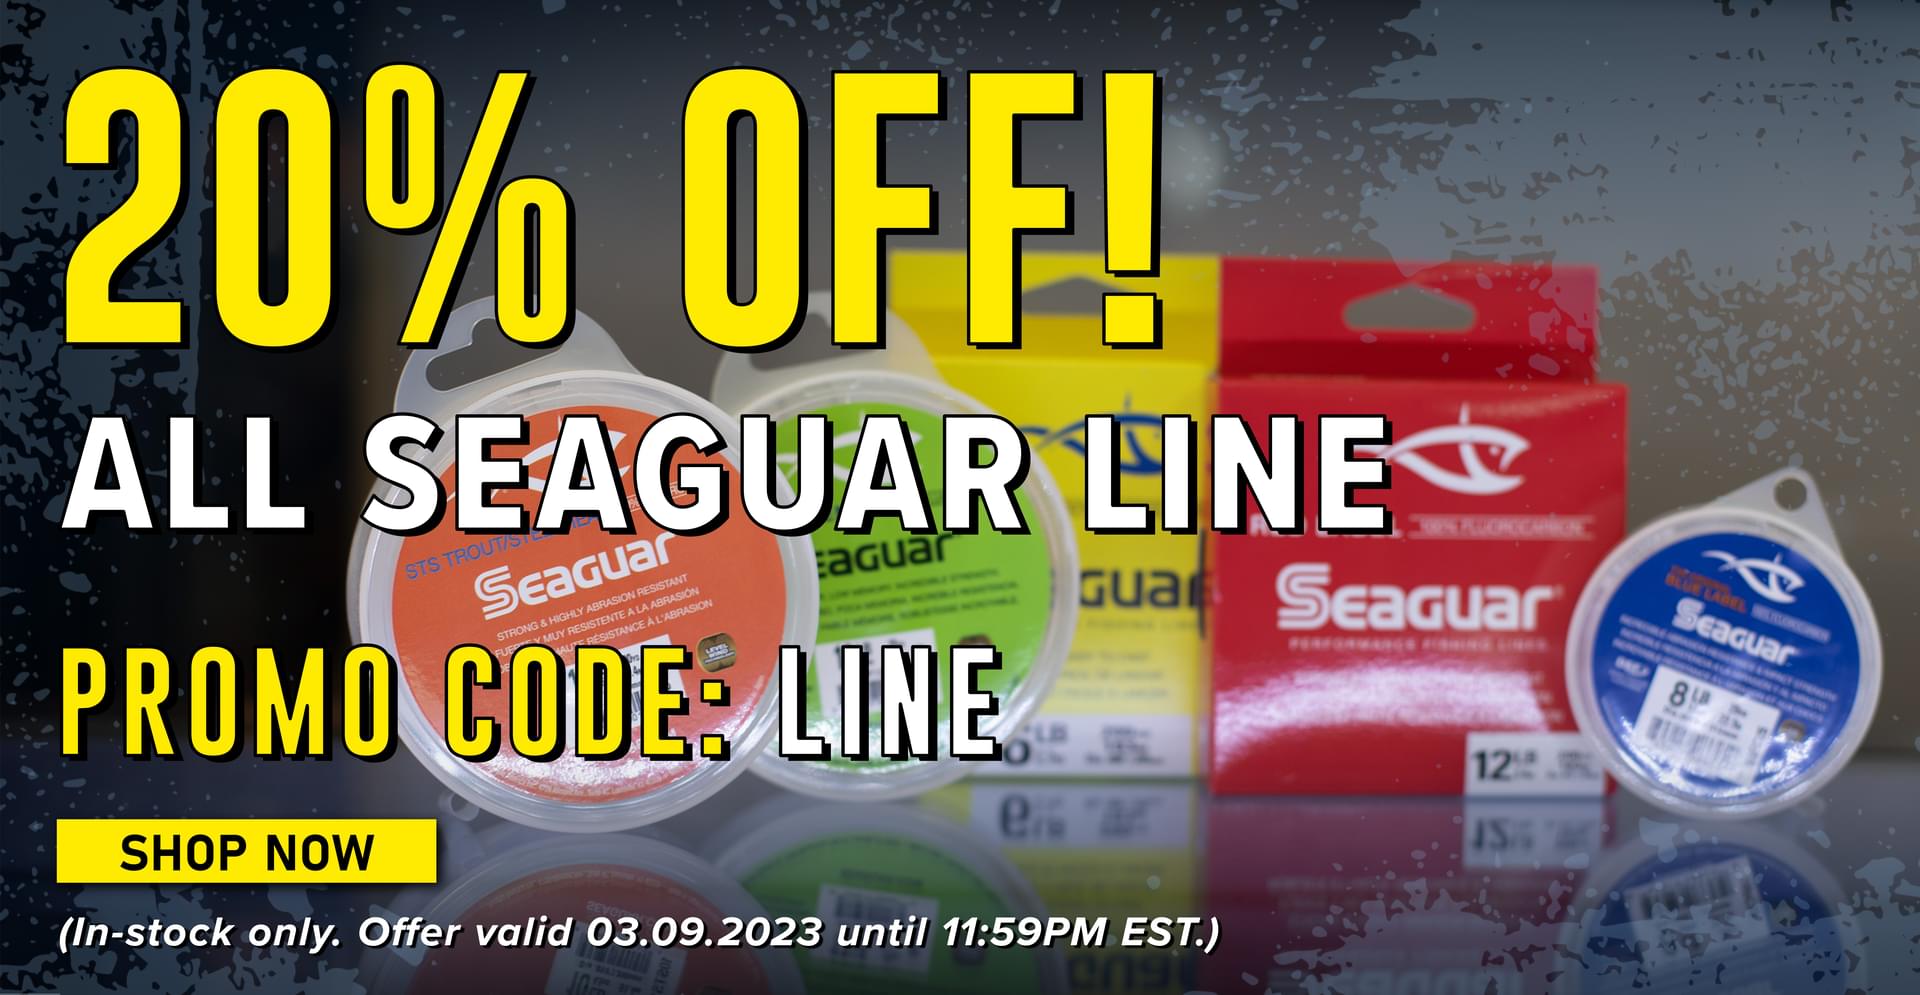 20% Off  All Seaguar Line Promo Code: LINE (In-stock only. Offer valid 03.09.2023 until 11:59PM EST.)  e ow LR , i 3 In-stock only. Offer valid 03.09.2023 until 11:59PM EST. 